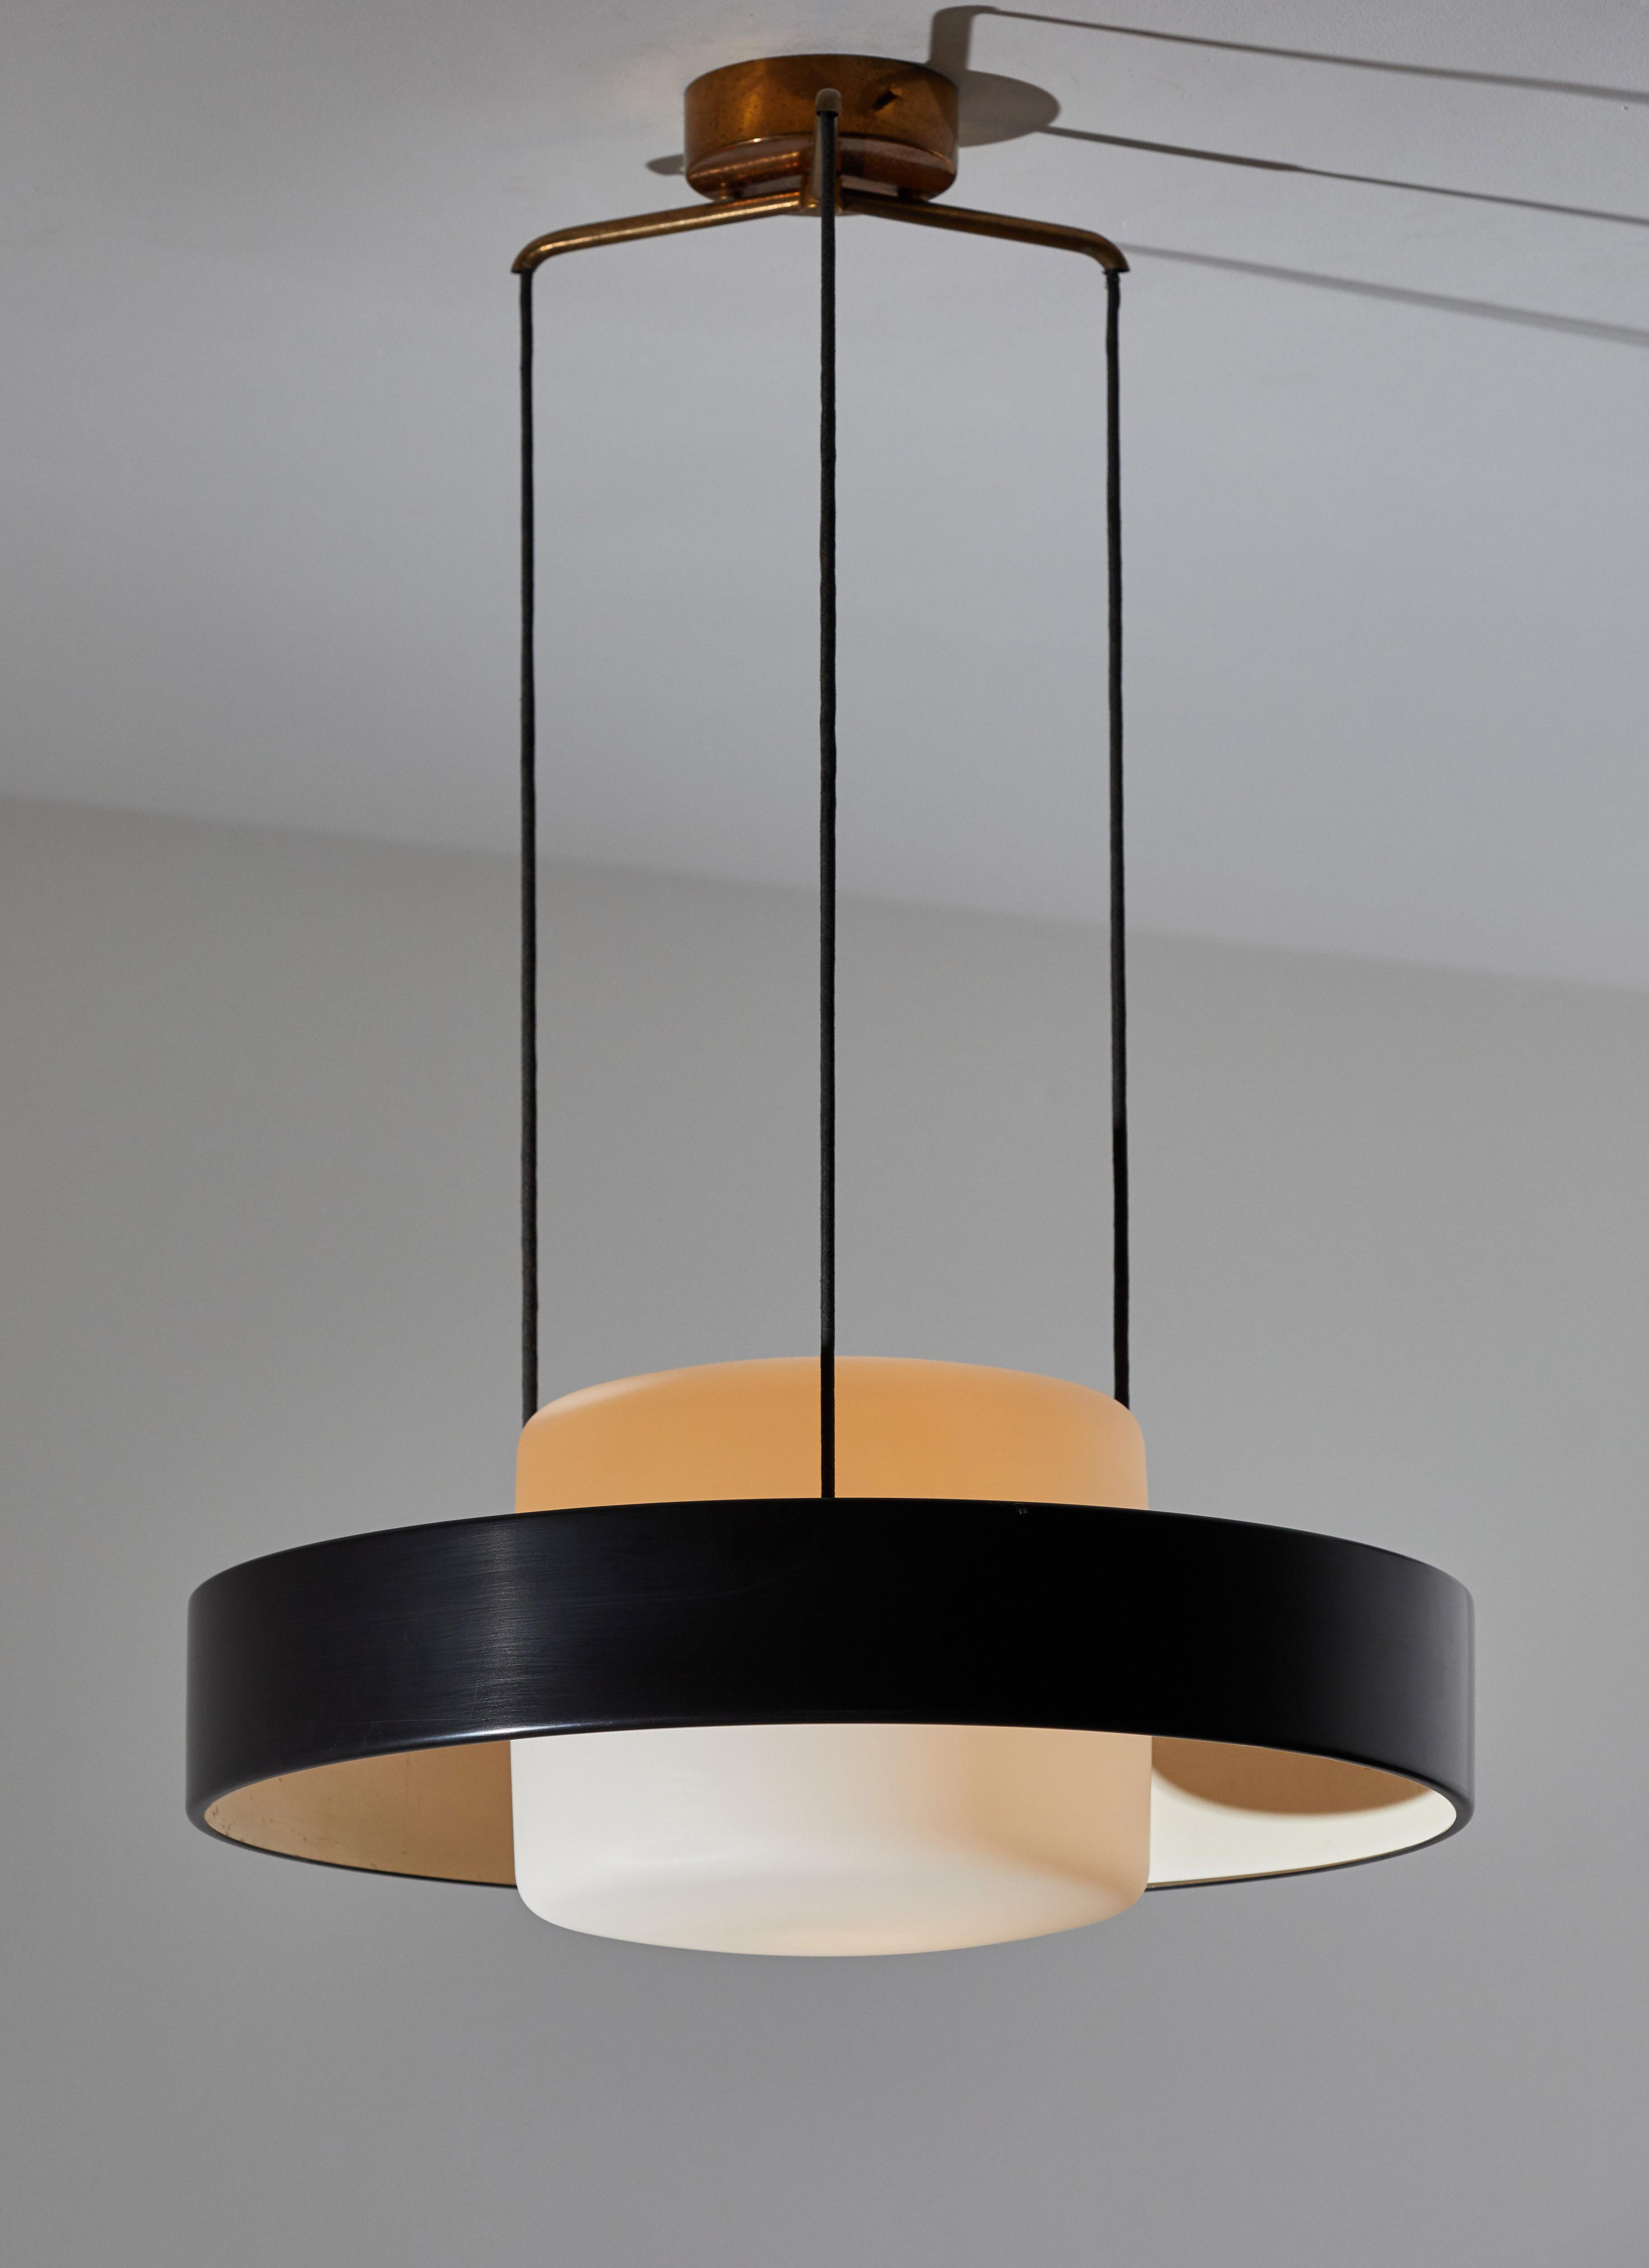 Rare model 1158 suspension light by Bruno Gatta for Stilnovo. Designed and manufactured in Italy, circa 1960s. Enameled metal with brushed satin glass diffuser. Rewired for U.S. junction boxes. Original brass ceiling and hardware. Takes one E27 100w